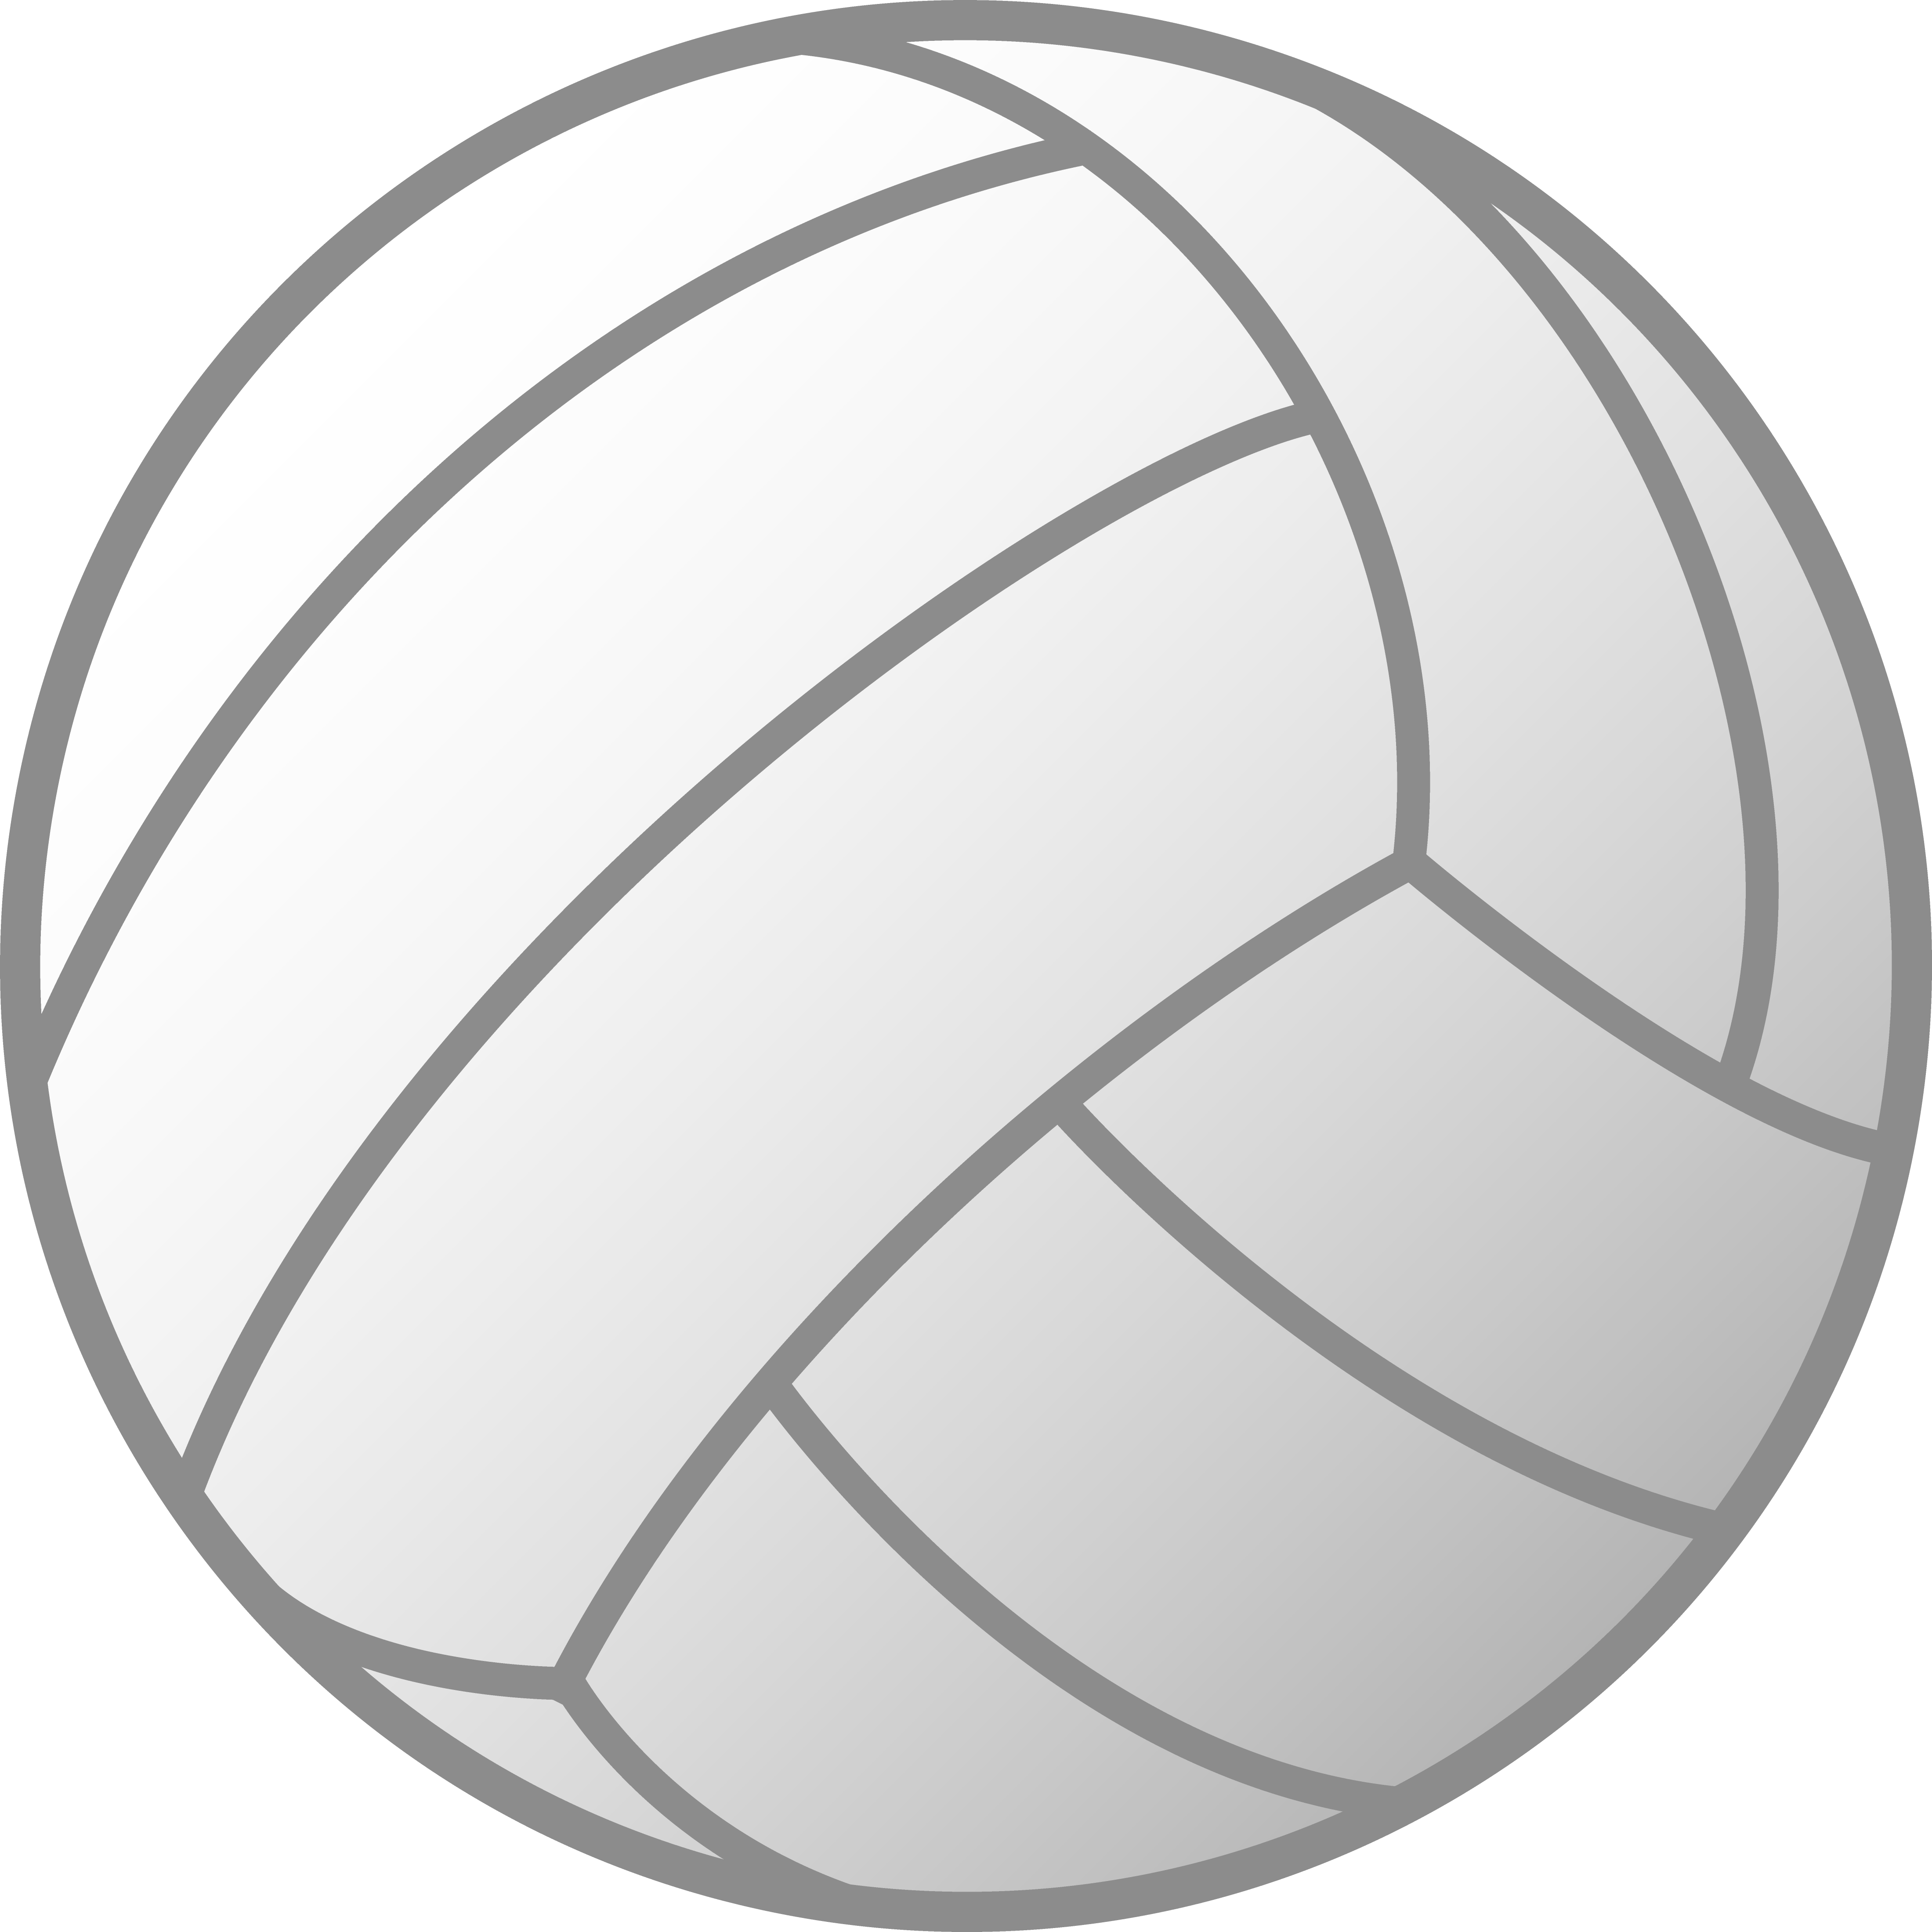 Volley Ball Volleyball Black And White Clipart